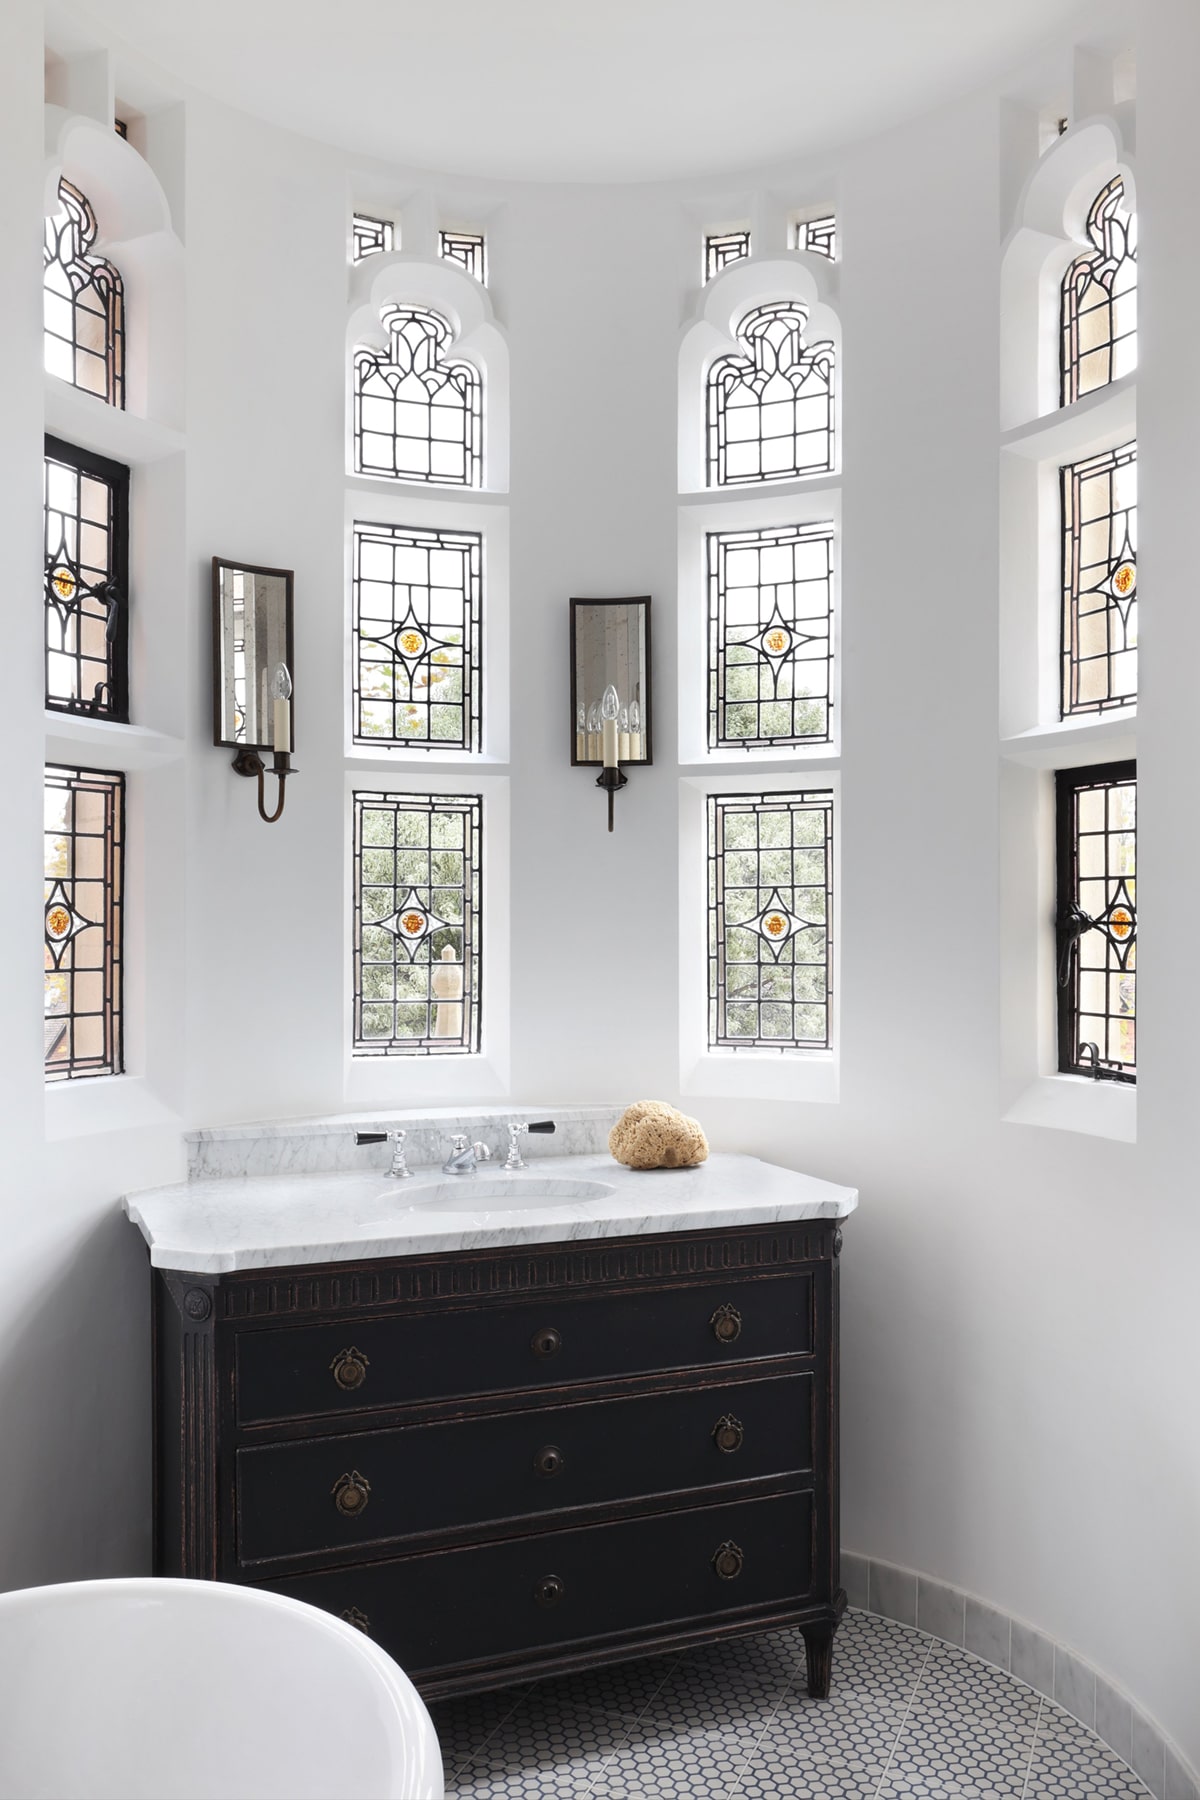 townhouse bathroom with gorgeous stained glass windows by HAM interiors